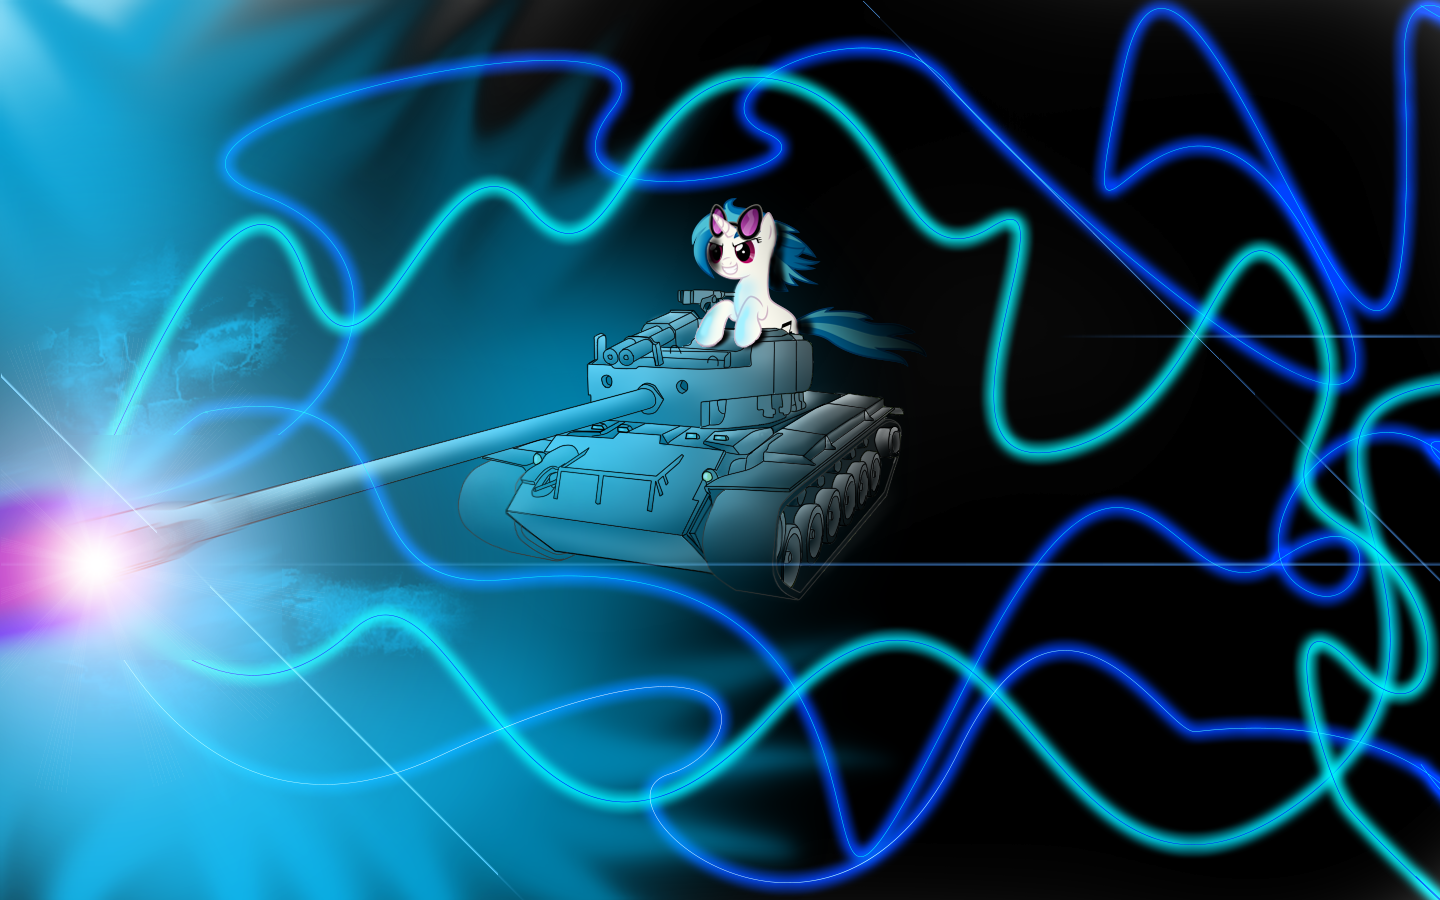 Vinyl Scratch  and T26E4 SuperPershing